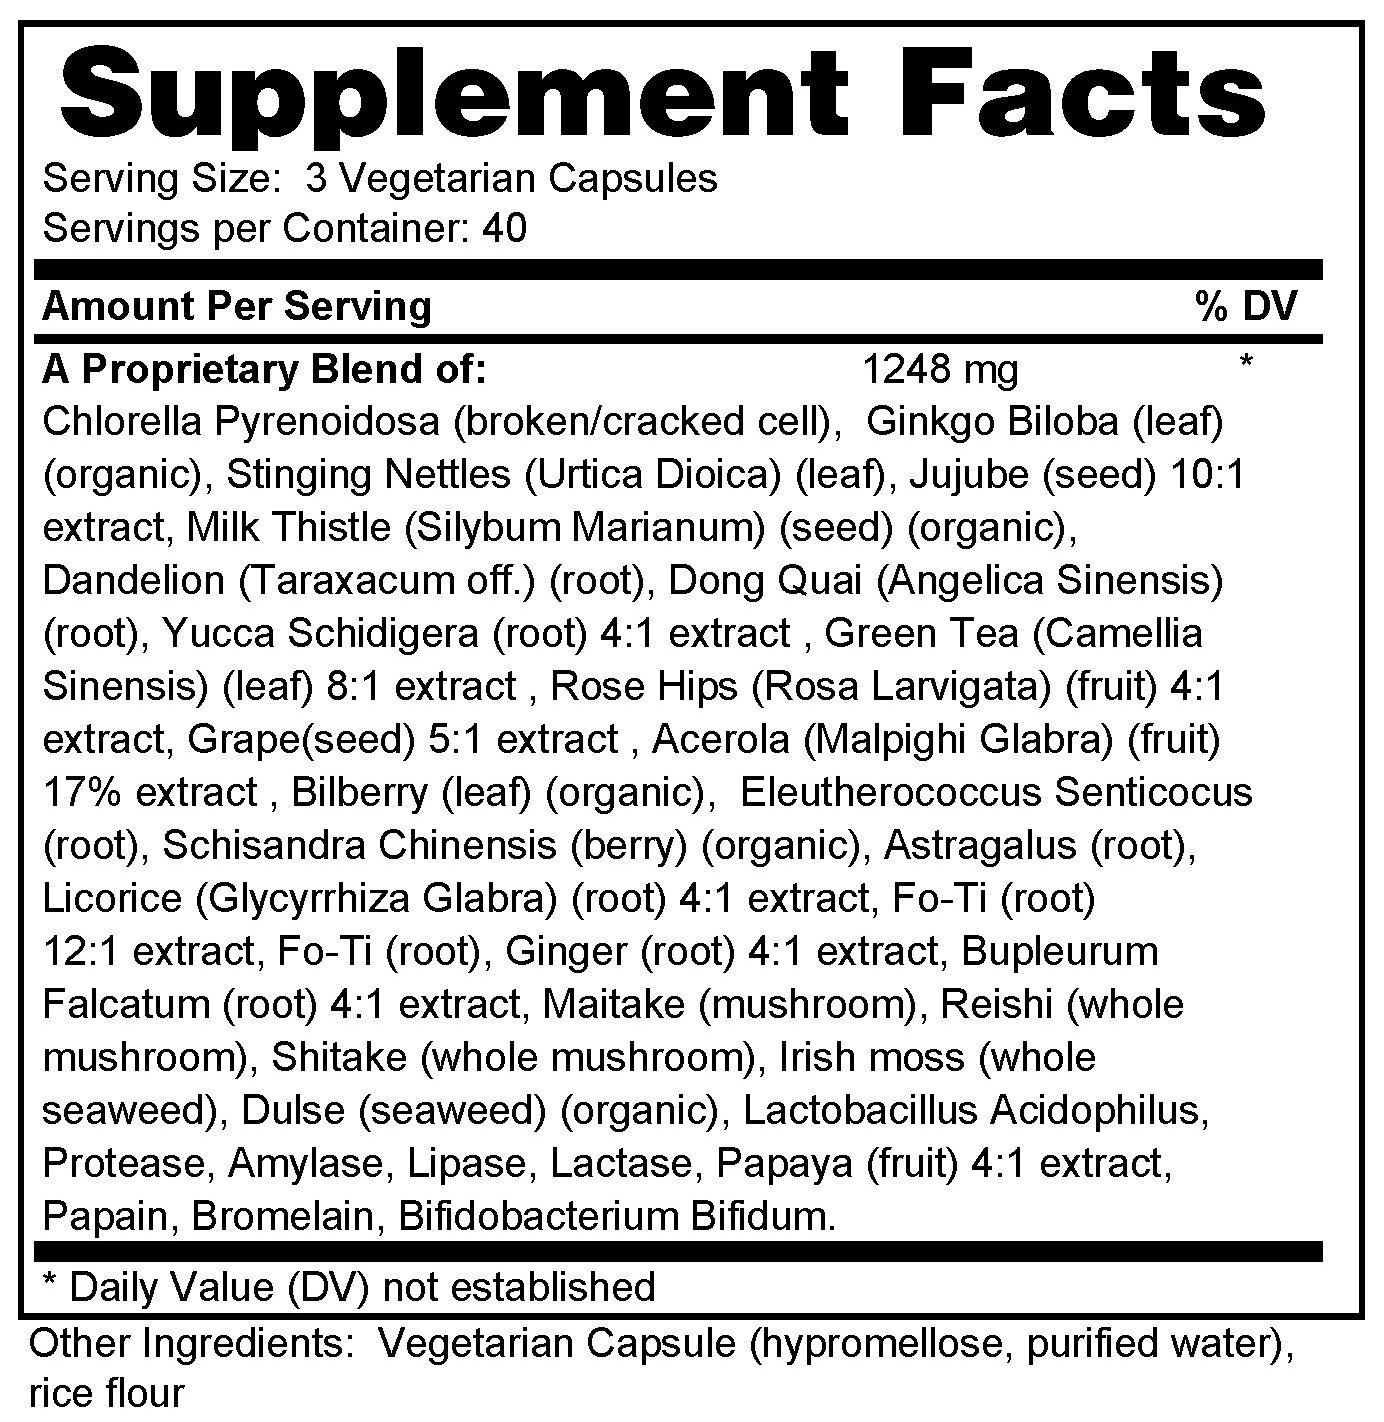 Supplement facts forSuper Greens Capsules 120s